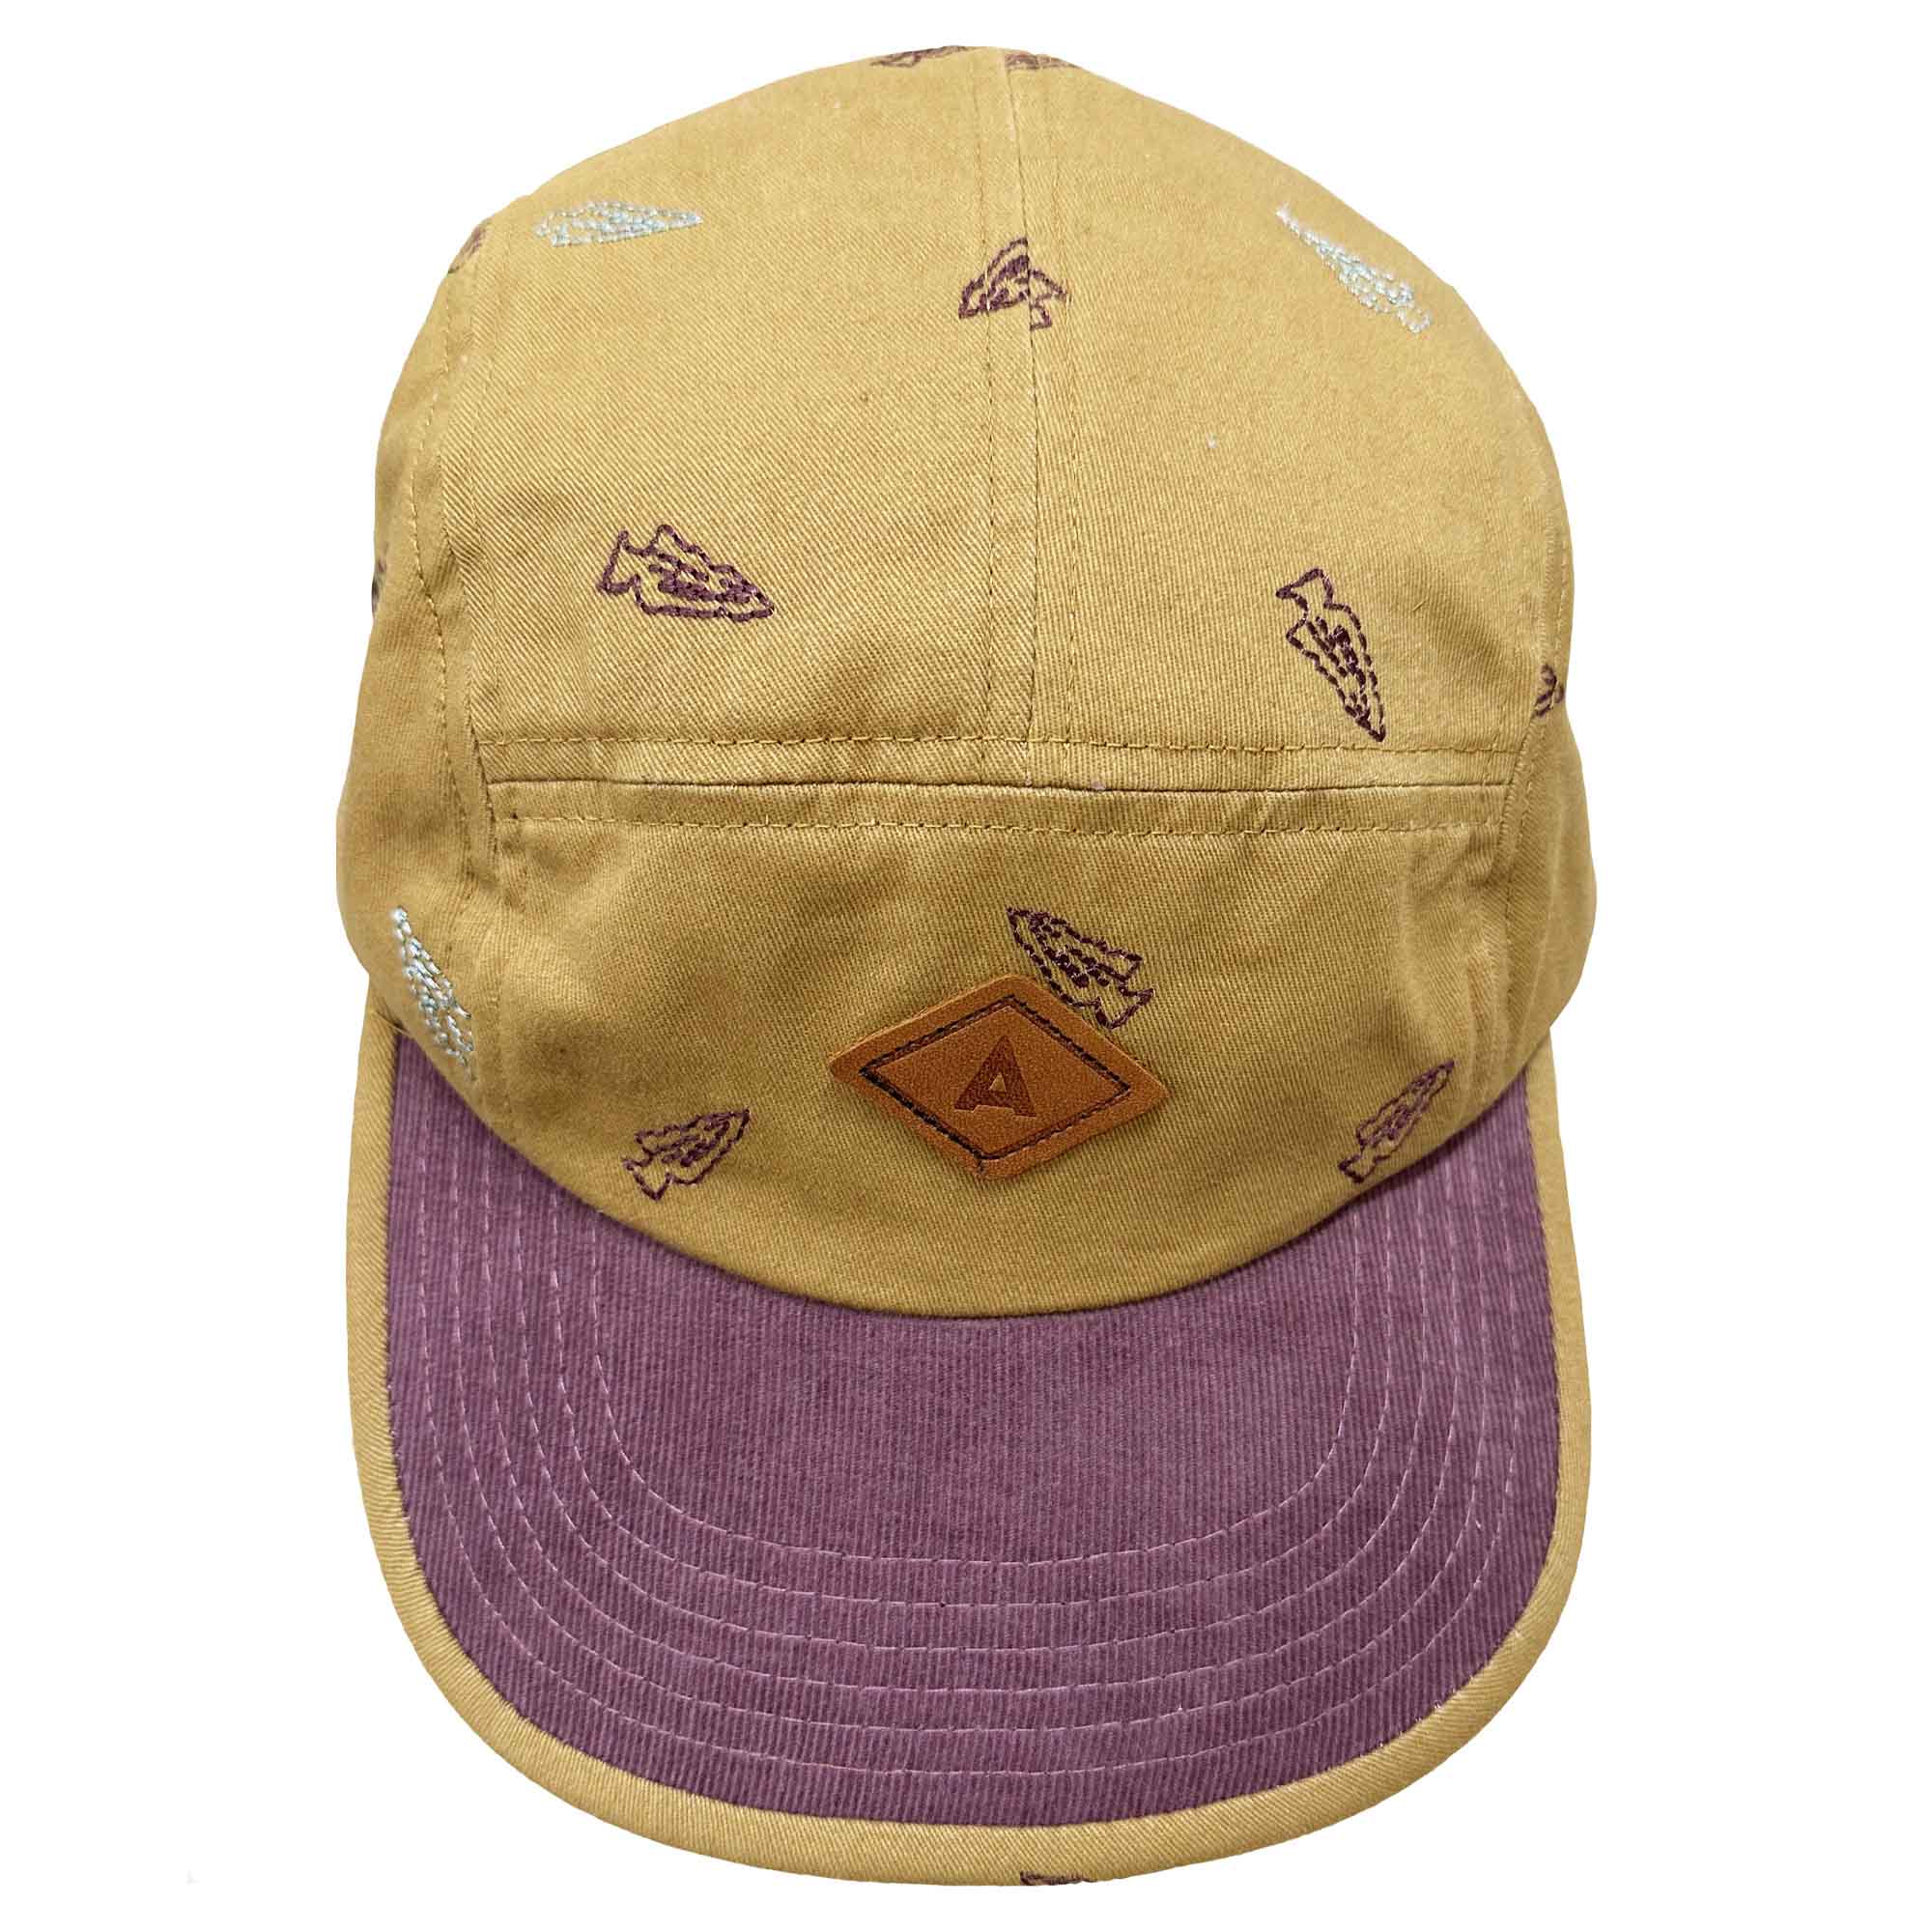 Arrow Heads 5-Panel Cap with adjustable strap and snap clip